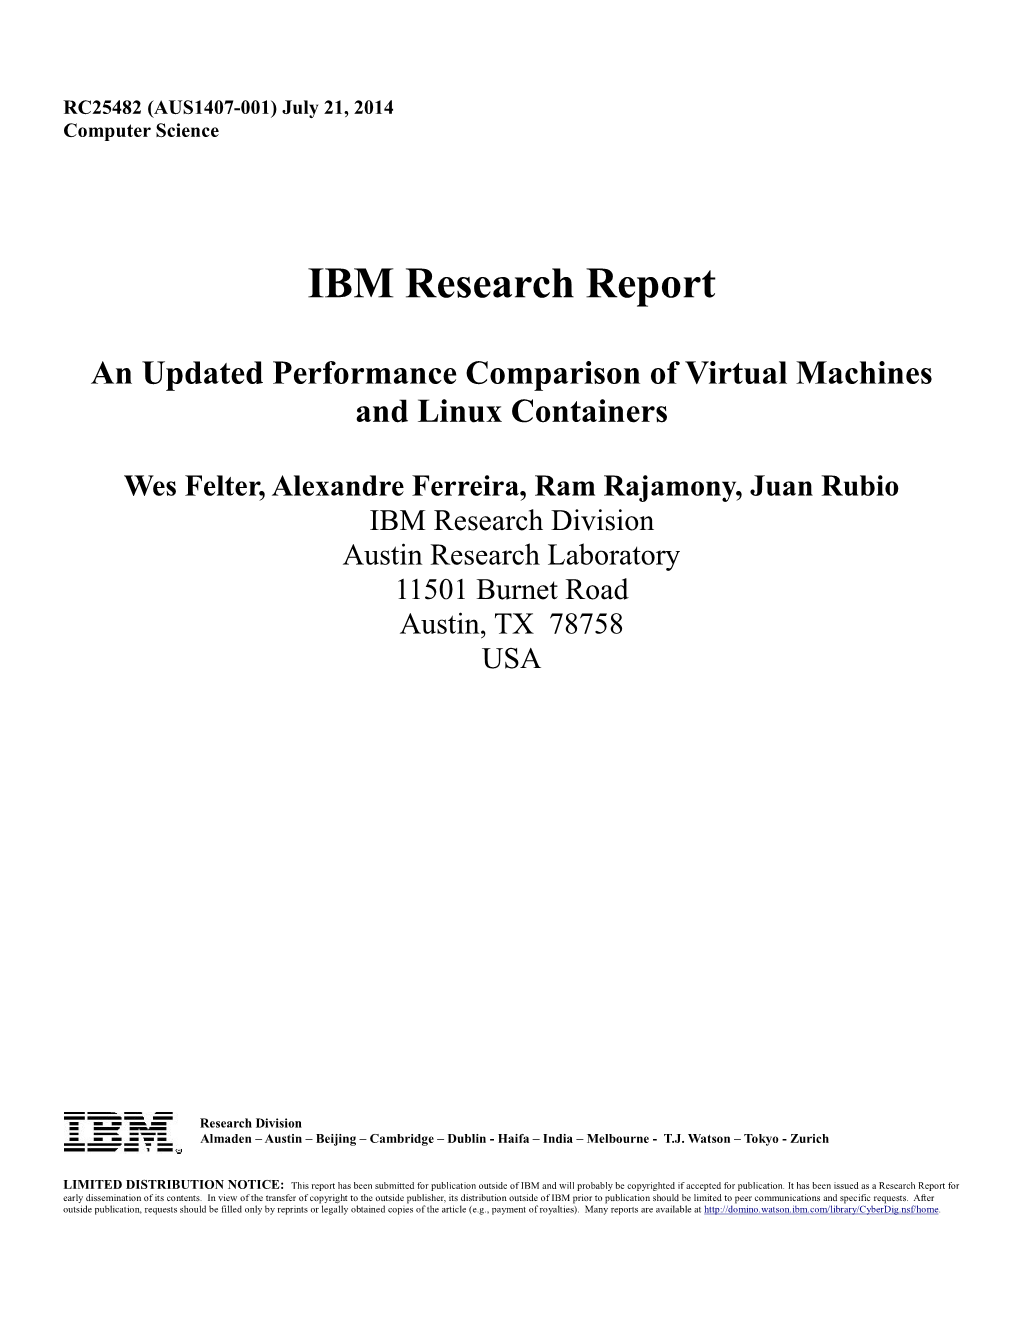 An Updated Performance Comparison of Virtual Machines and Linux Containers